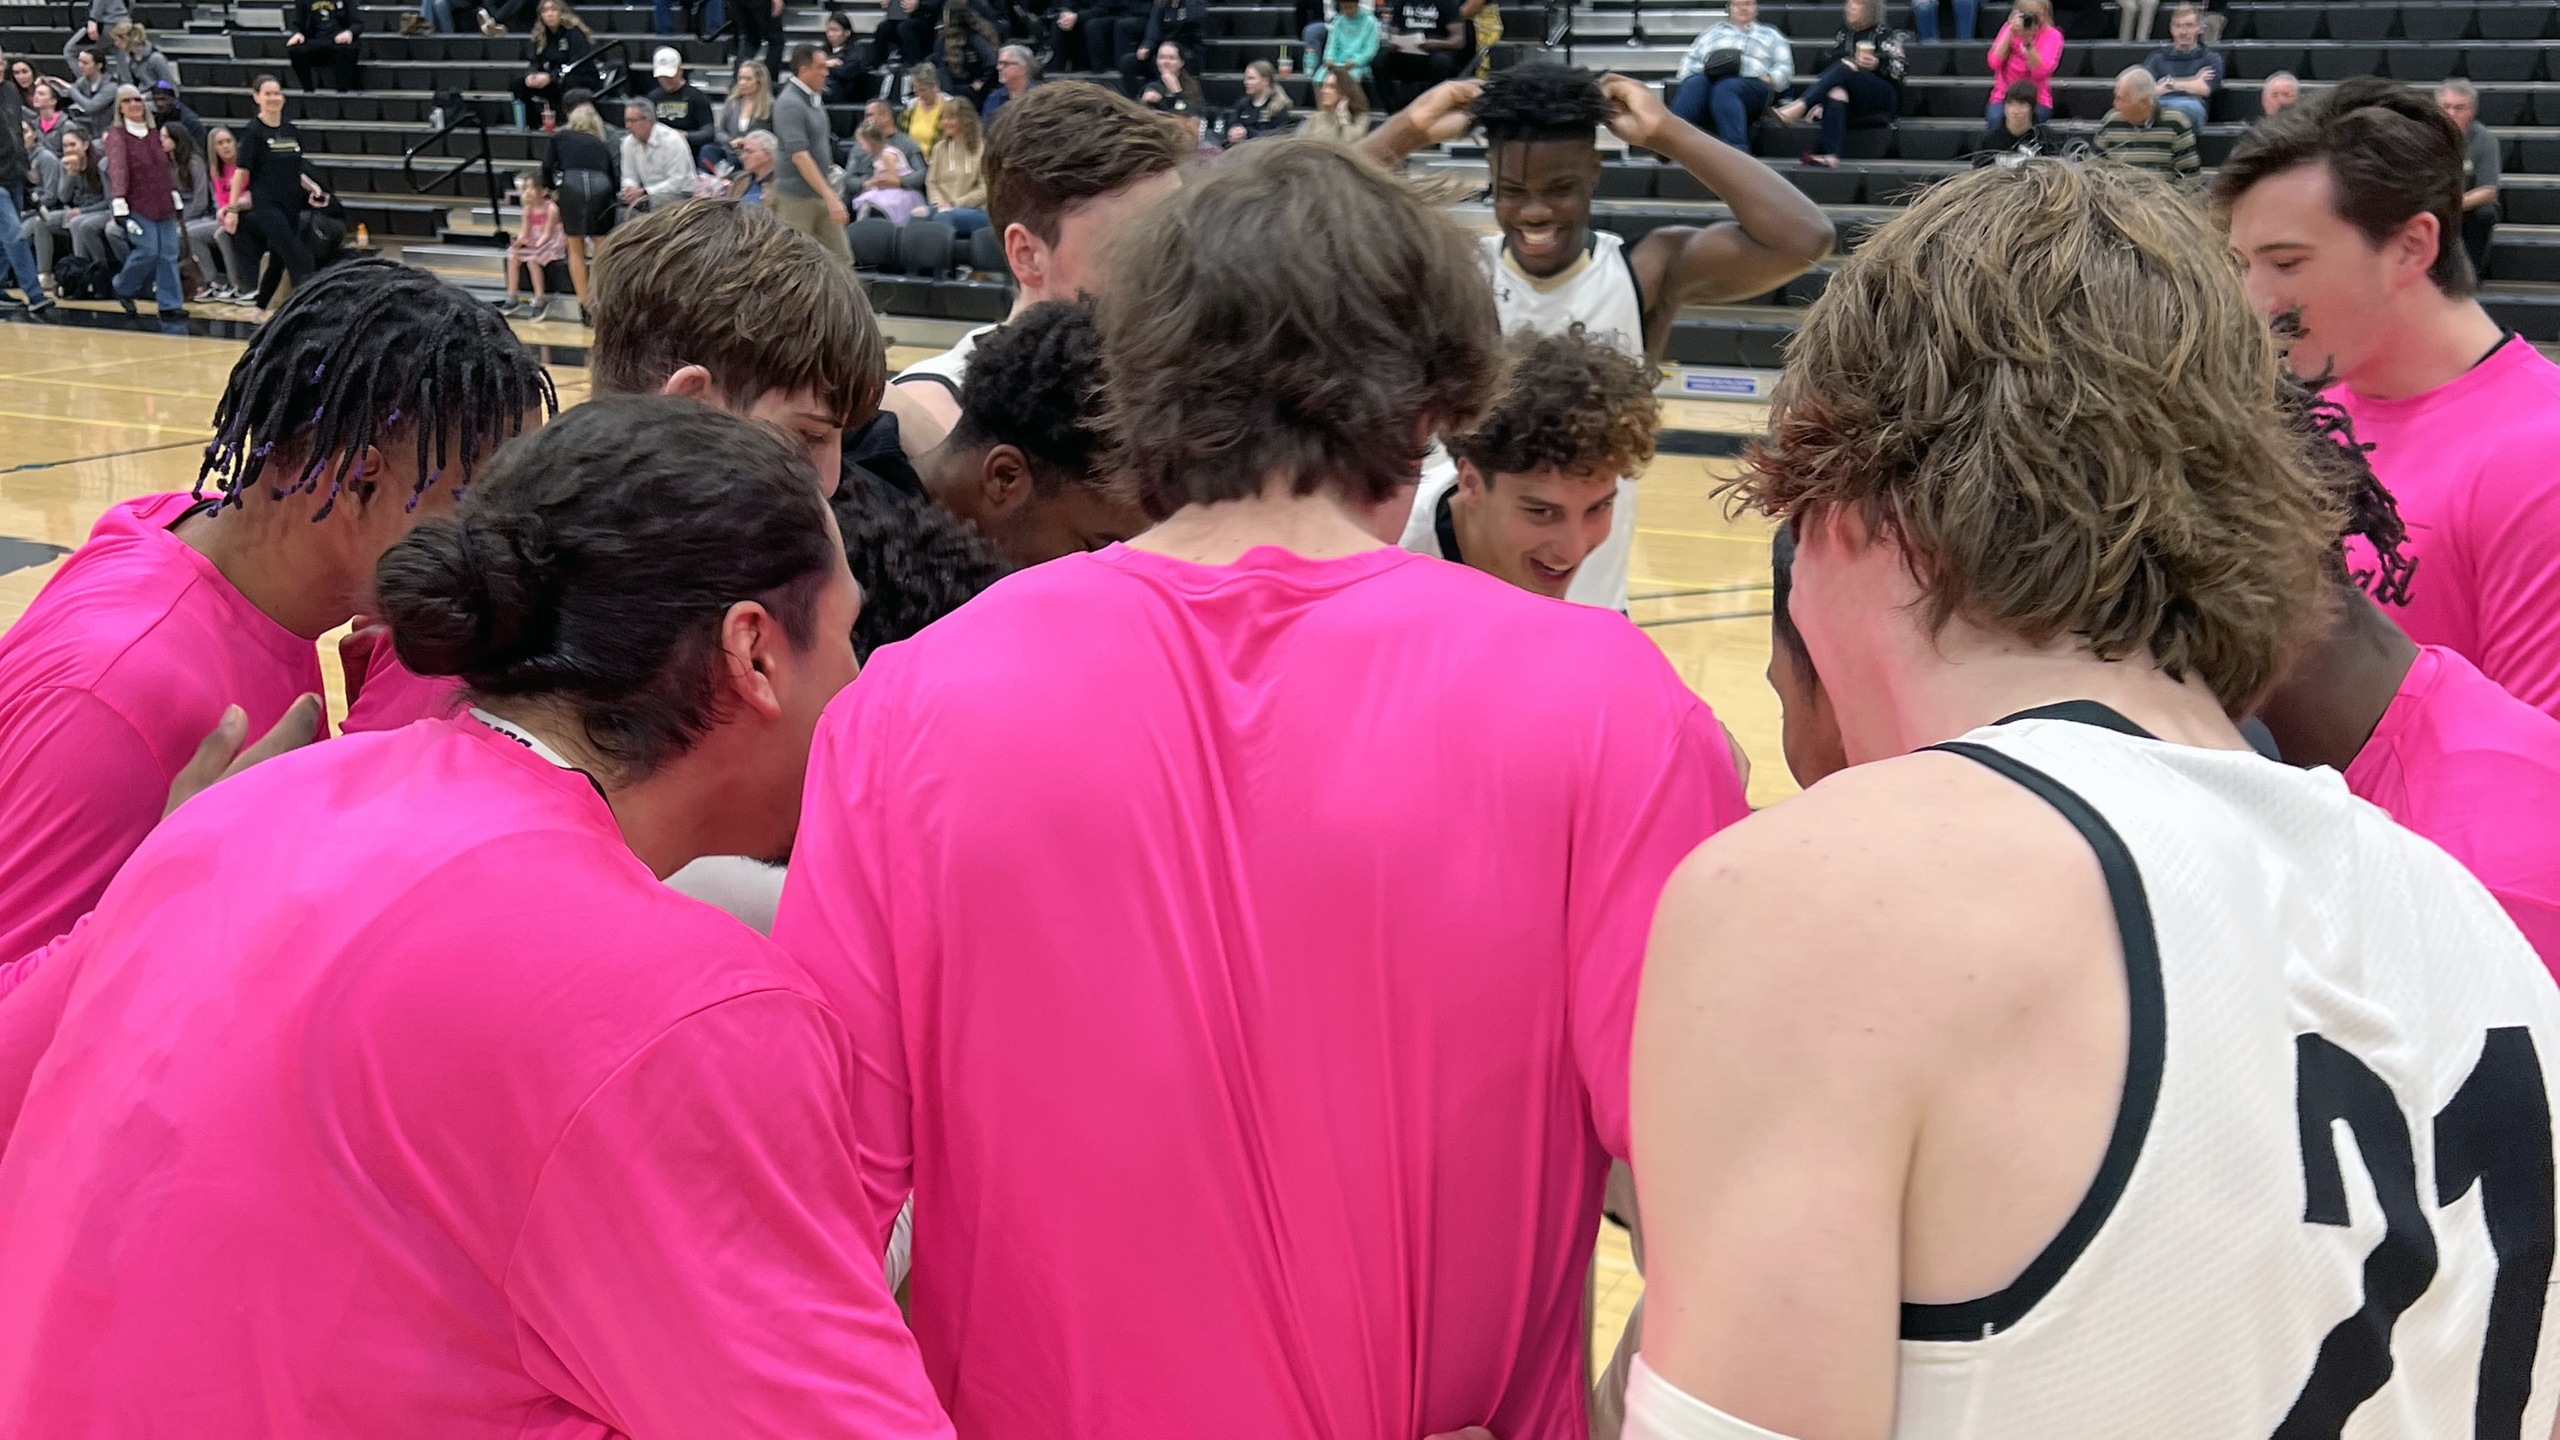 Men's Basketball Wins Nail-Biter over Feather River, 83-81